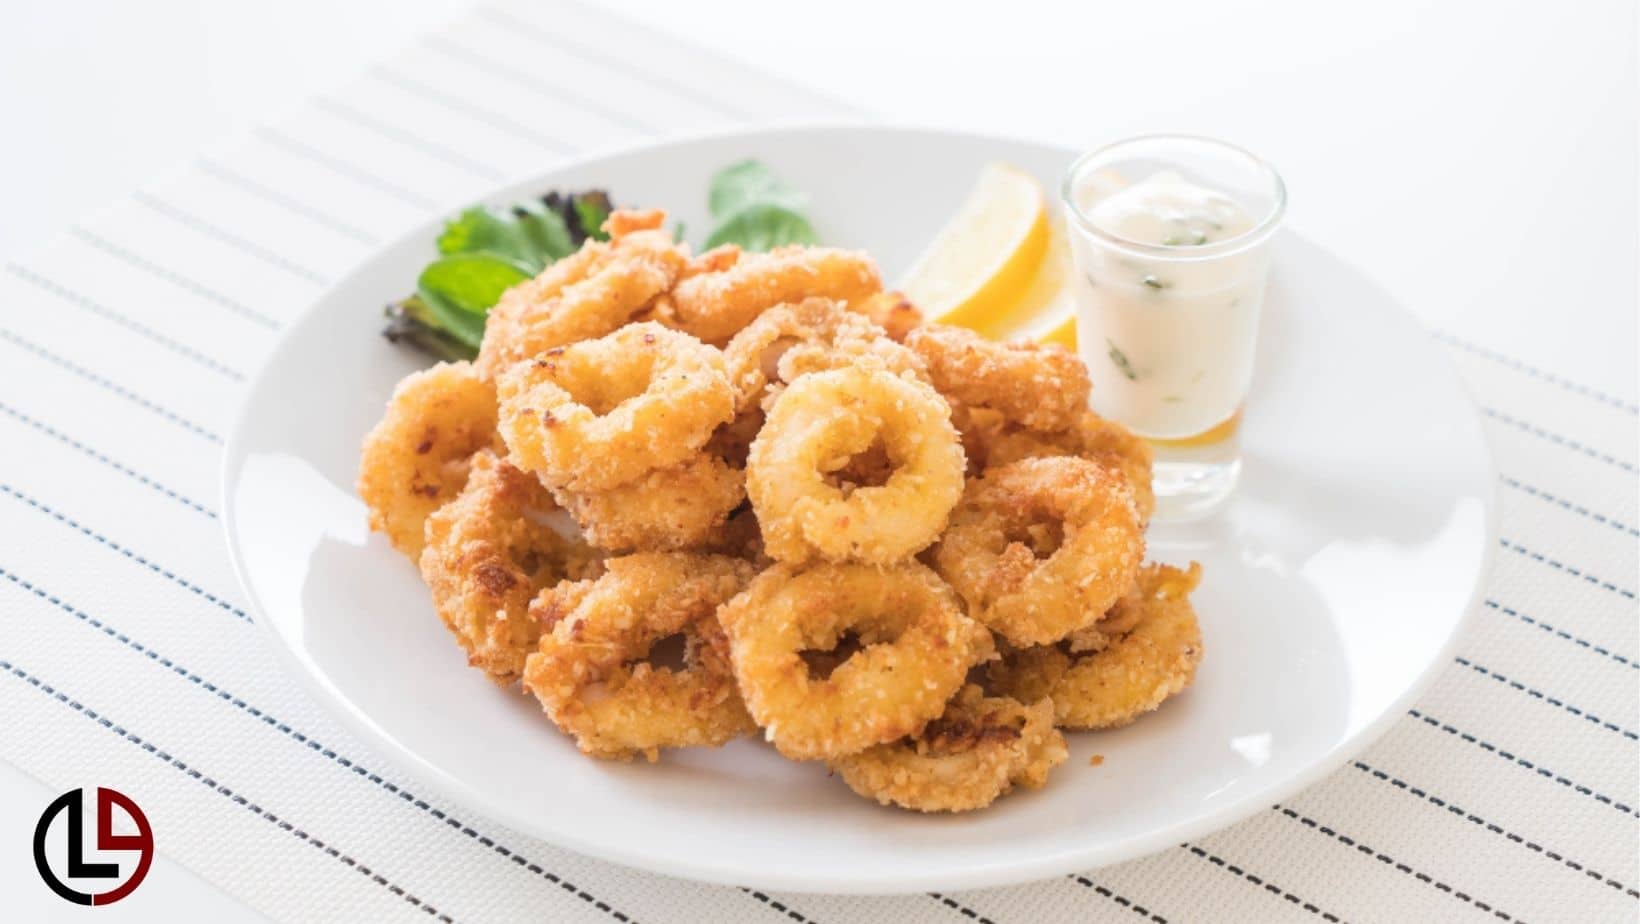 Calamari is a dish that is made from squid